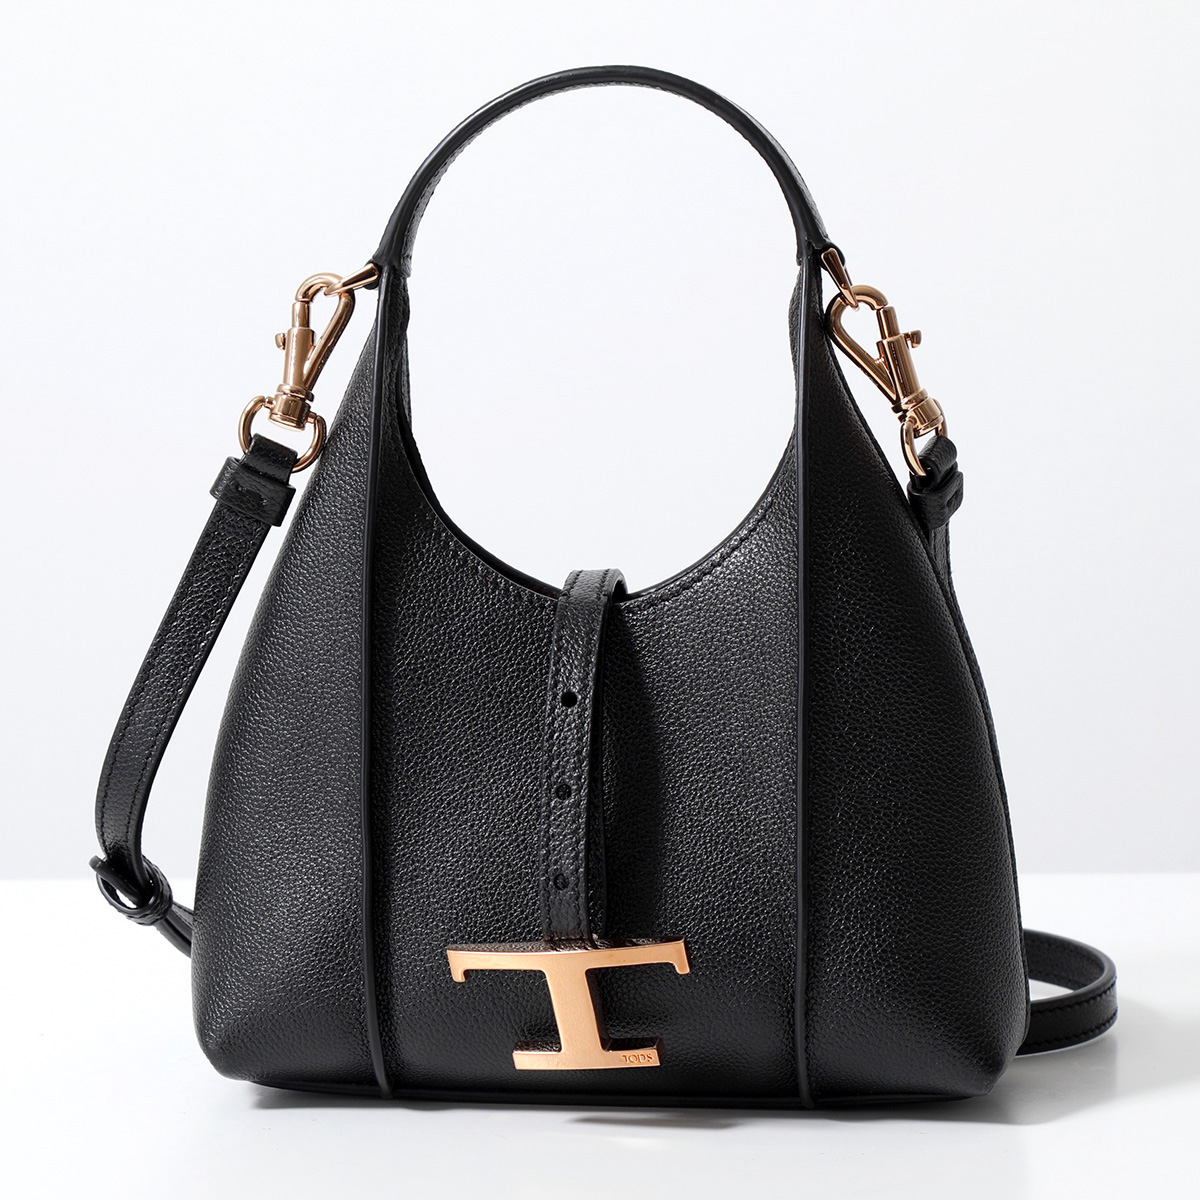 TODS トッズ ショルダーバッグ T TIMELESS Tタイムレス XBWTSBE0000Q8E レディース ハンドバッグ マイクロ レザー ロゴ  鞄 カラー4色